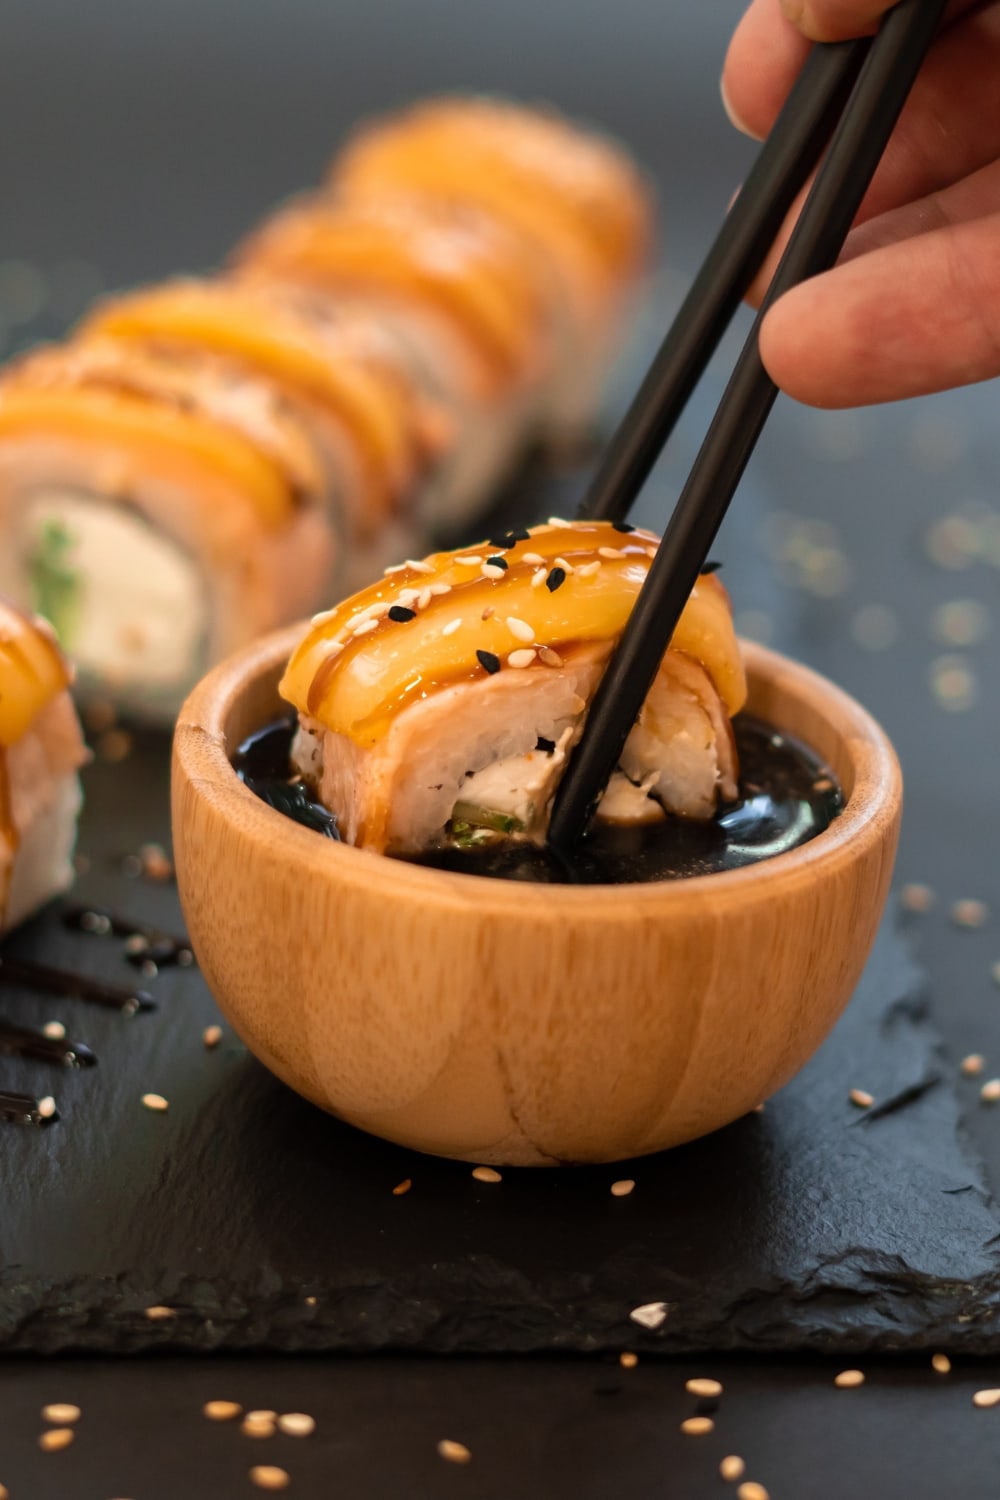 Sushi Roll with Cream Cheese and Salmon Dipped With a Chopstick on Dipping Sauce on a Wooden Bowl